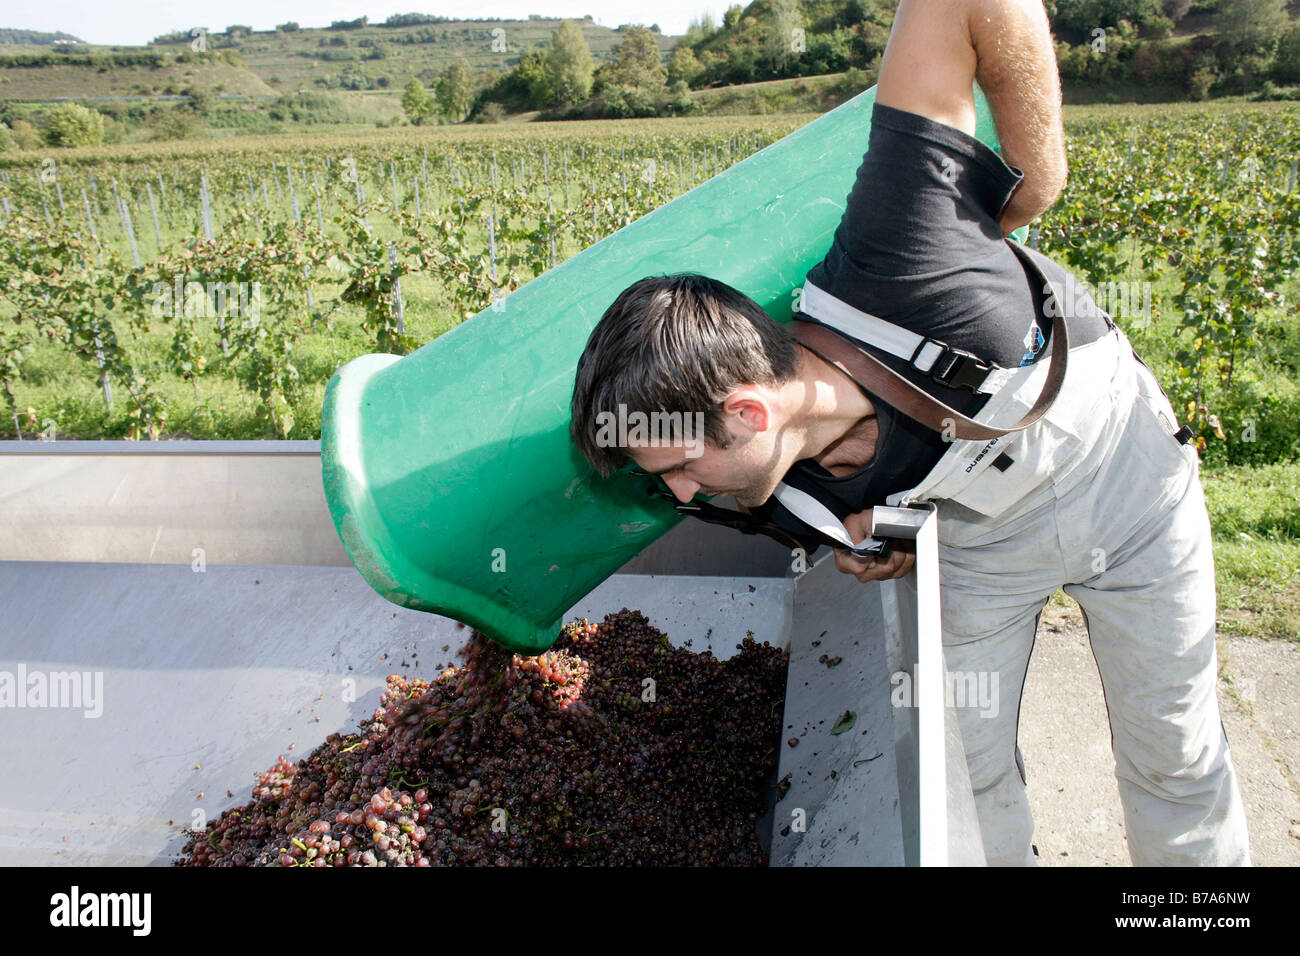 Harvester tipping grapes from a collecting bin during grape harvest in a Kaiserstuhl vineyard in Ihringen, Baden-Wuerttemberg,  Stock Photo